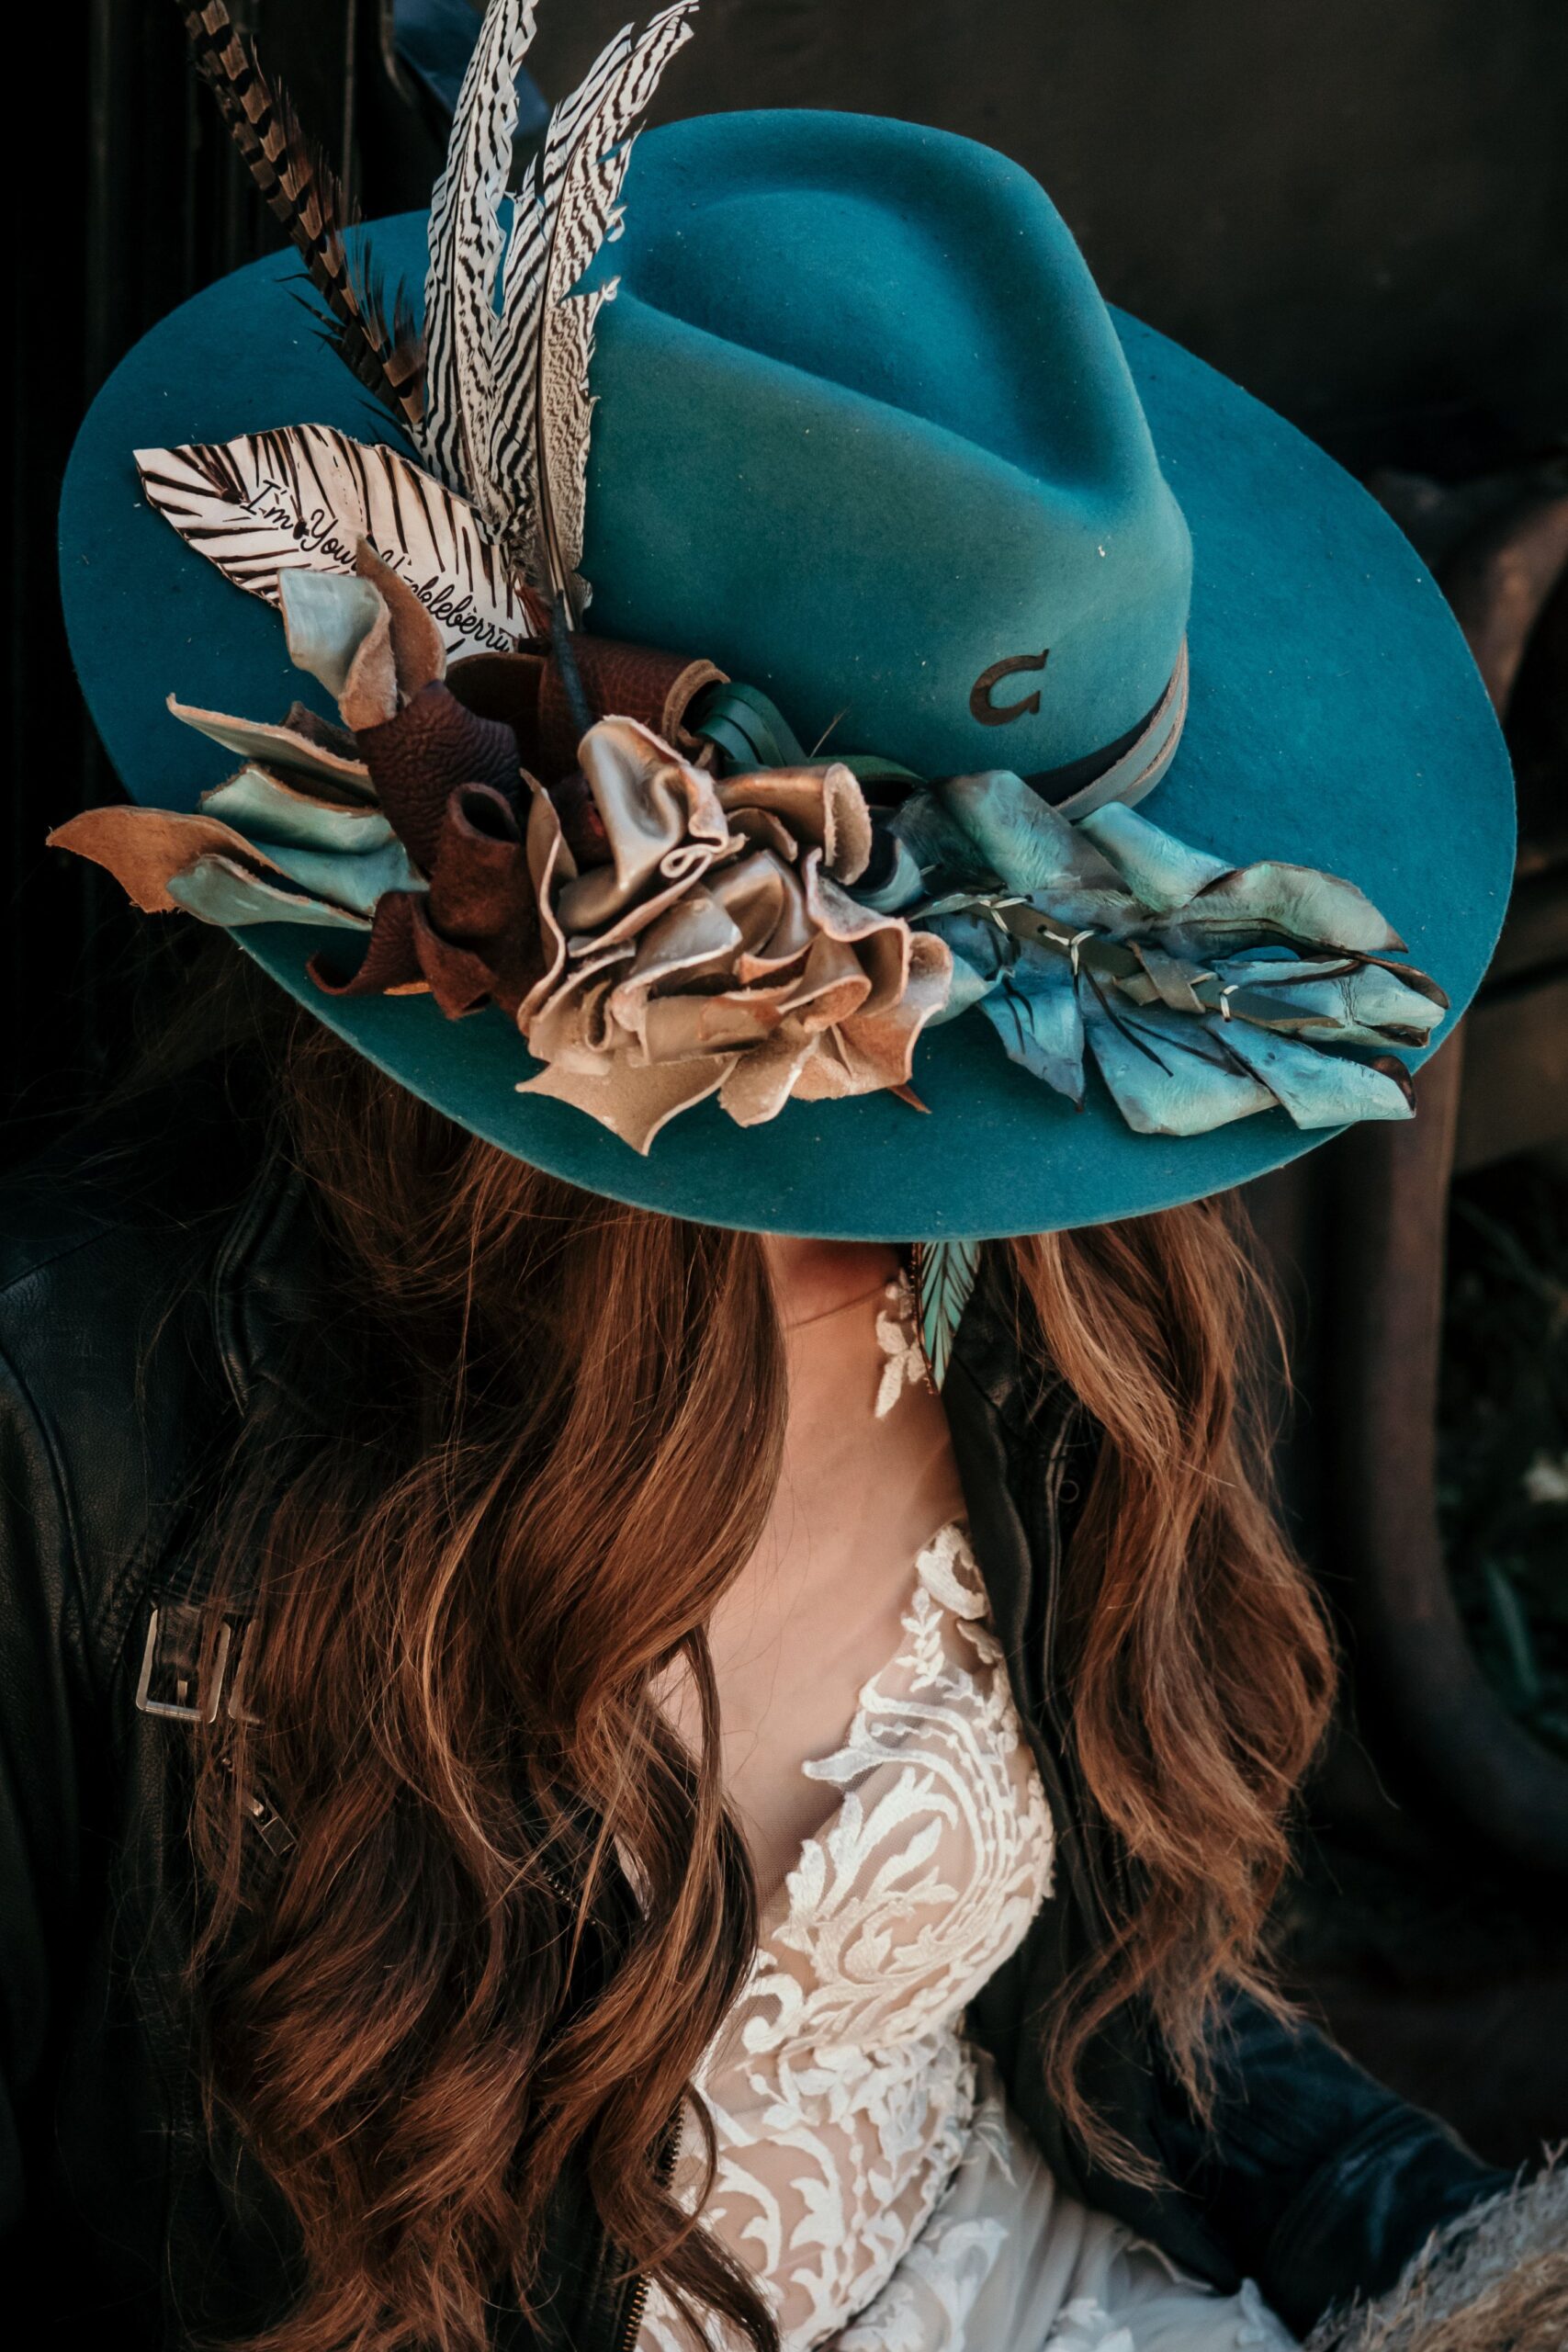 Classy head accessory at wedding – Hats
for weddings